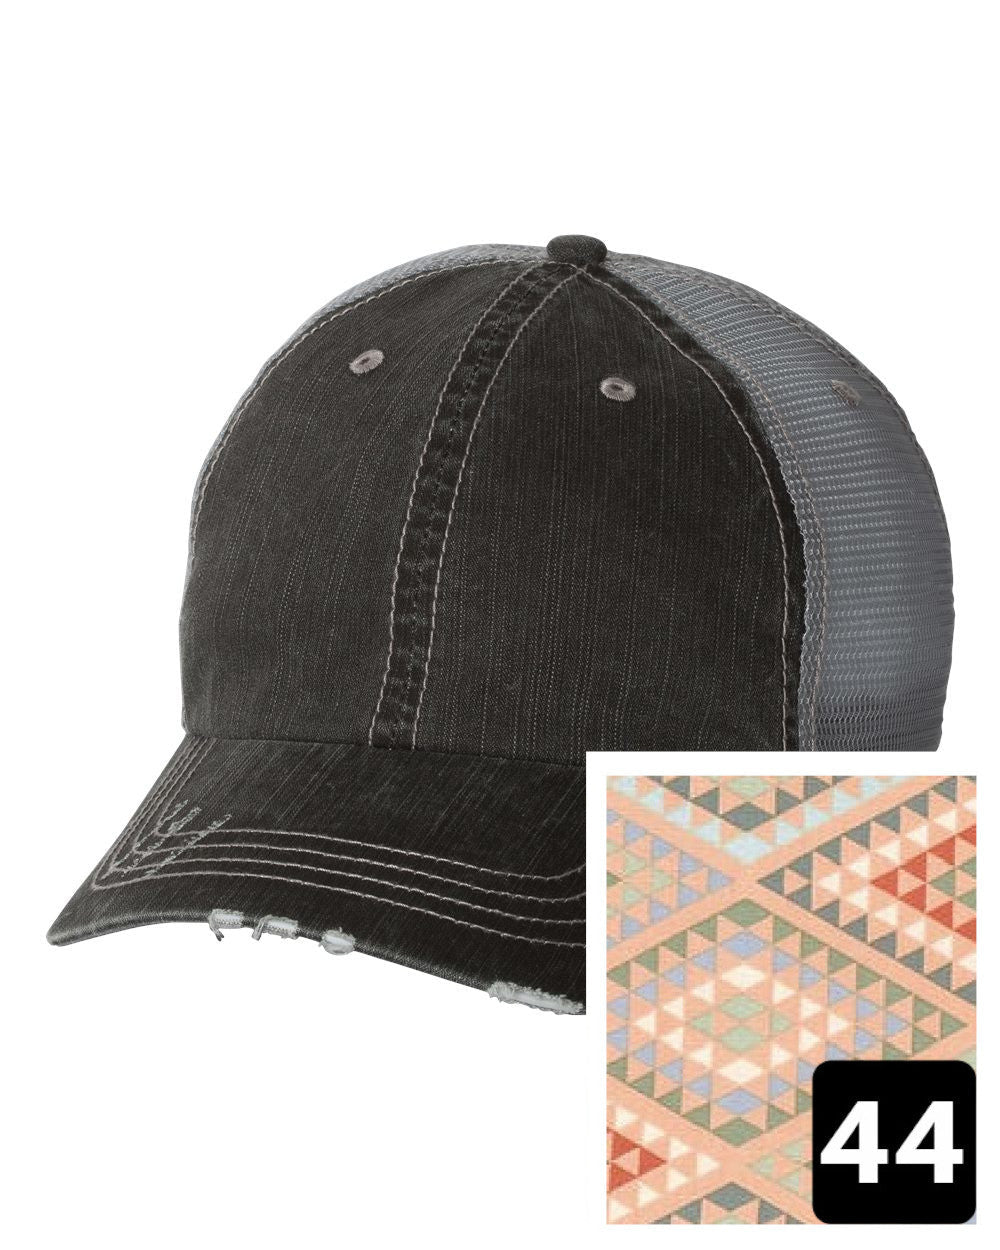 gray distressed trucker hat with navy coral and white chevron fabric state of South Dakota